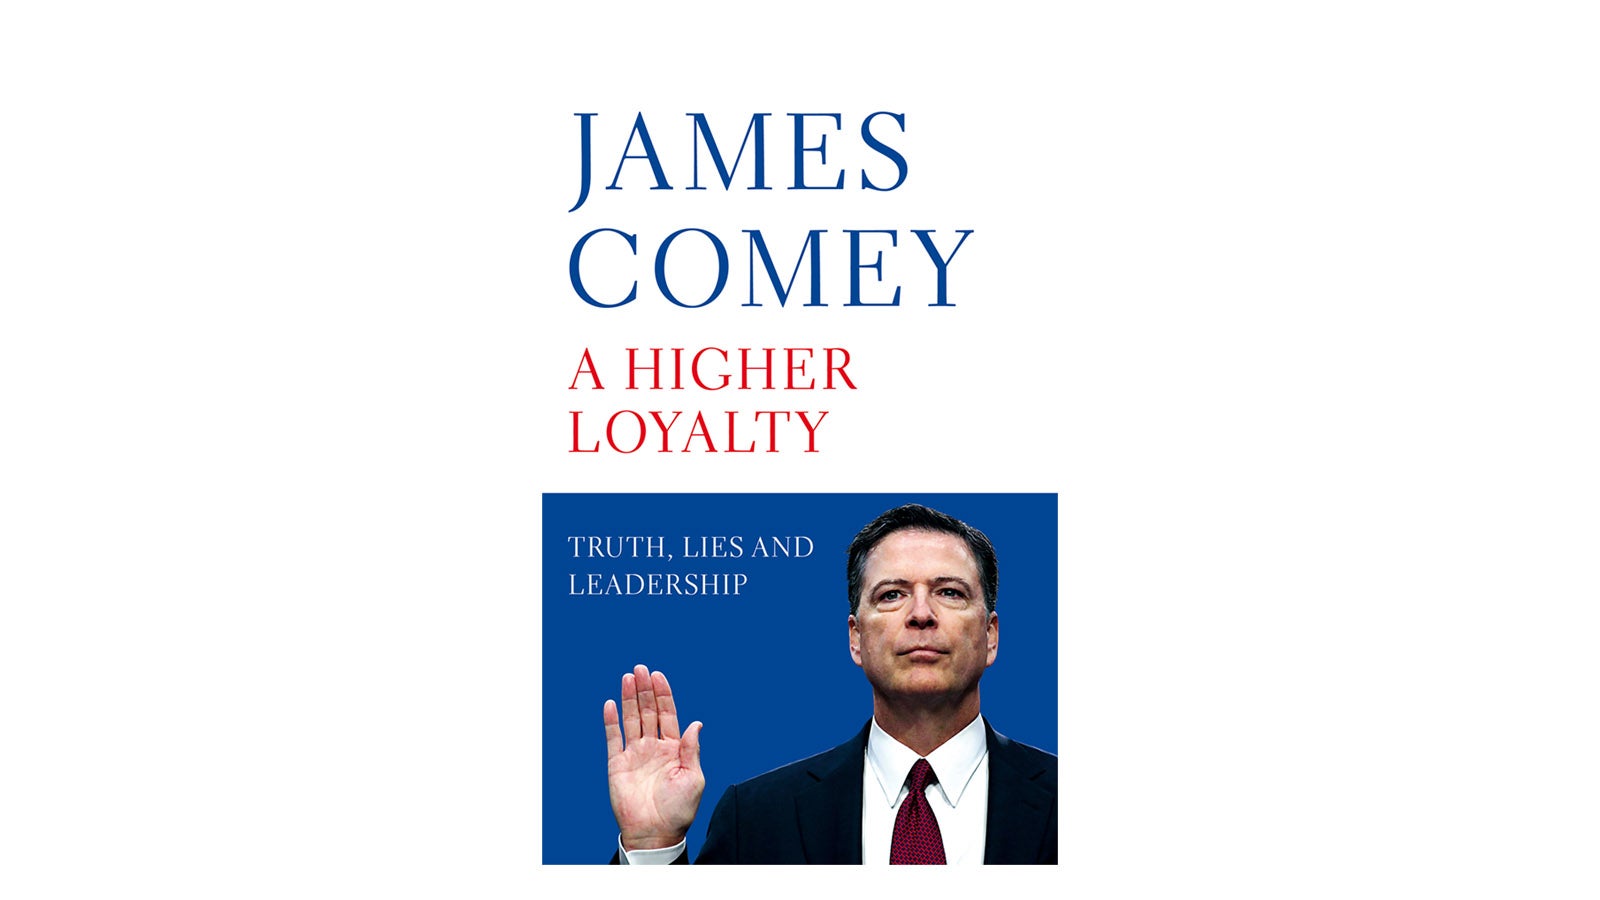 A Higher Loyalty book cover by James Comey